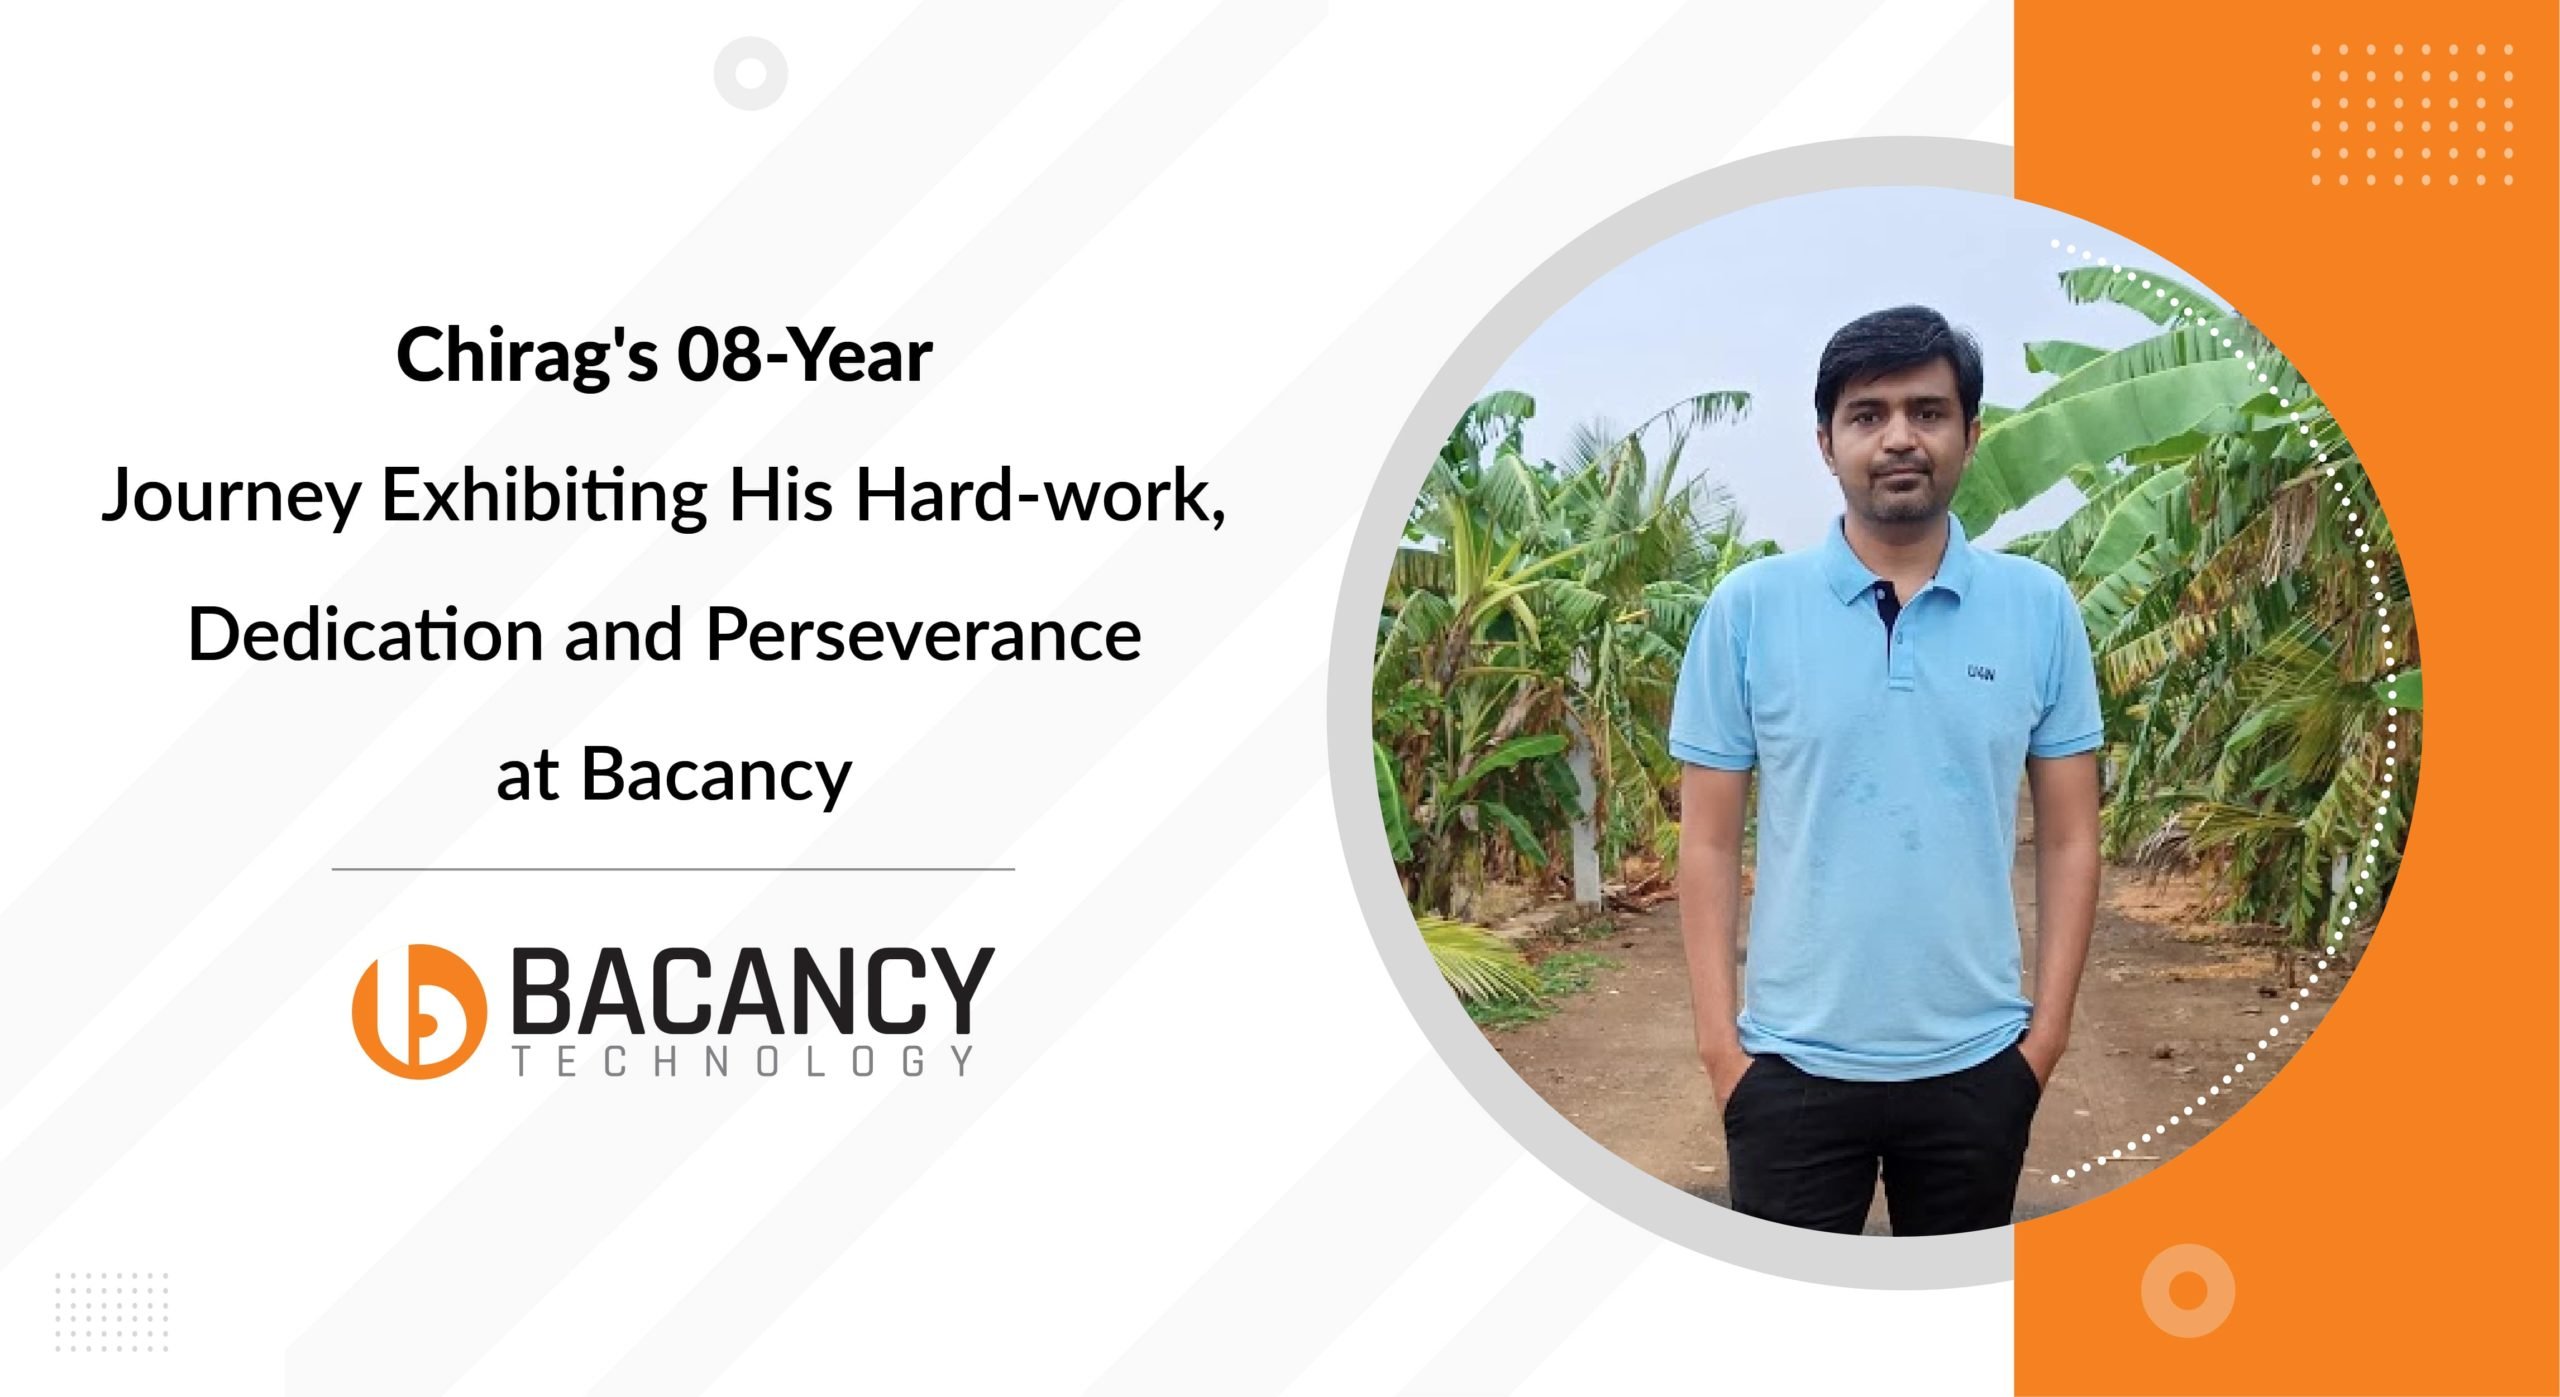 Chirag’s 08-Year Journey Exhibiting His Hard-work, Dedication and Perseverance at Bacancy